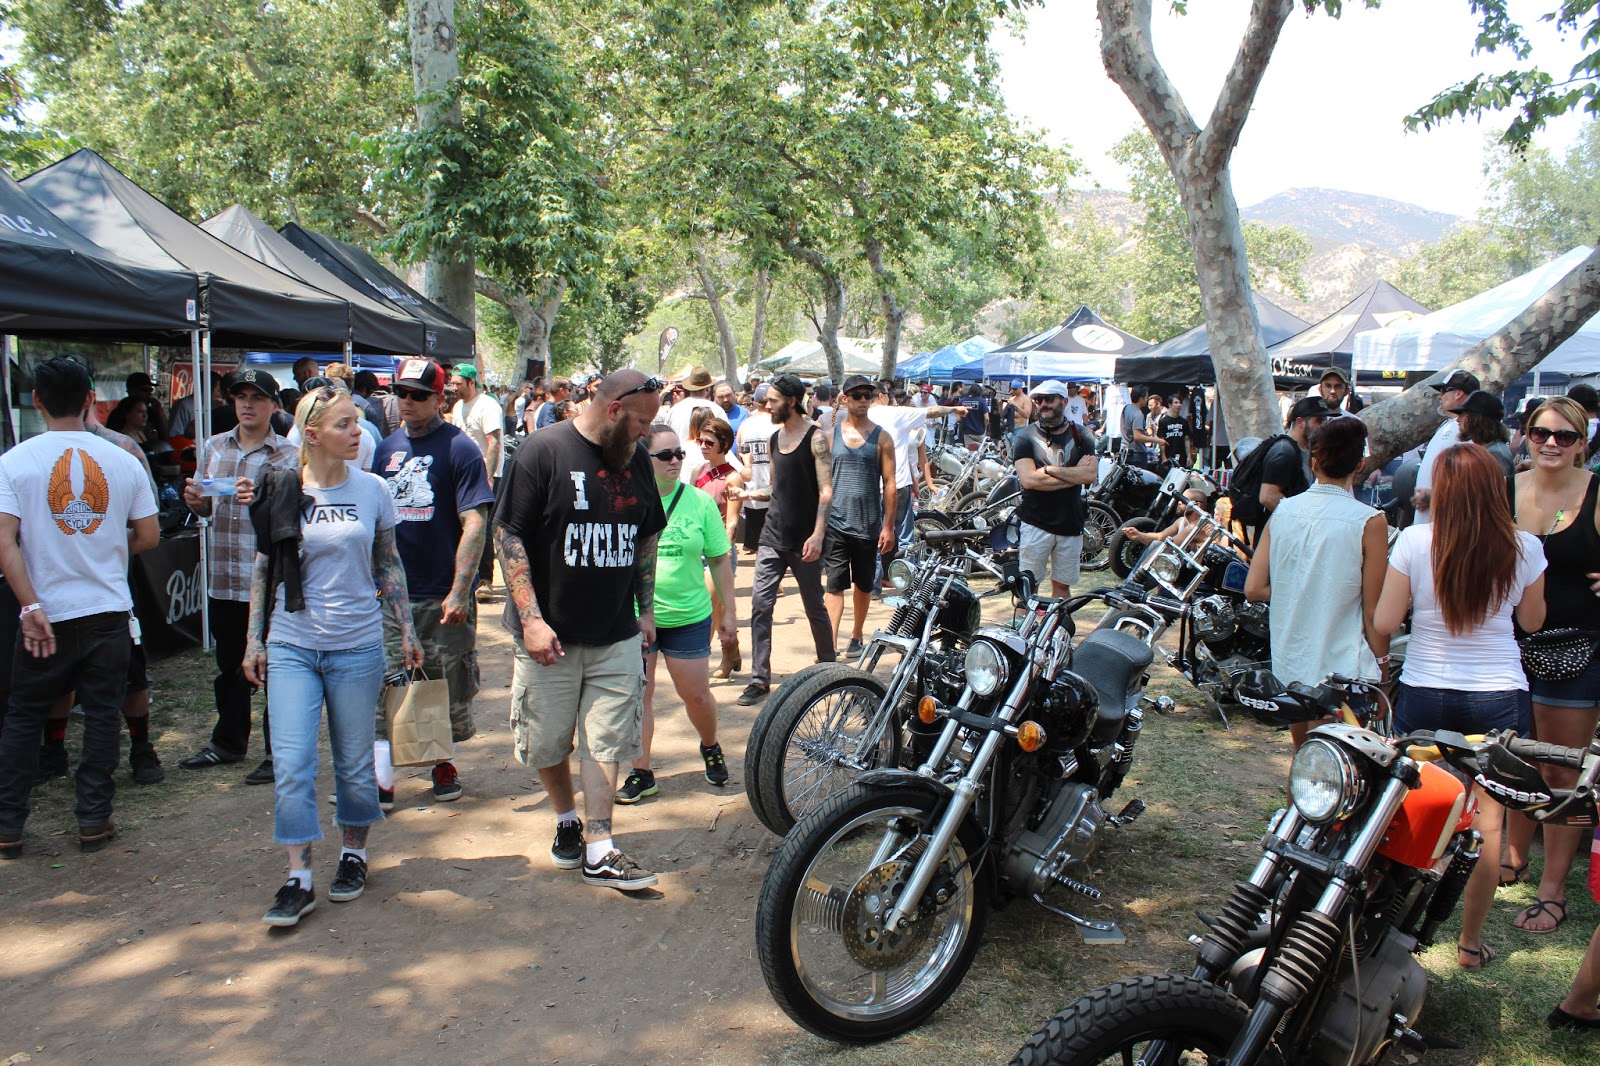 Covering Classic Cars : Born Free 5 Motorcycle Show in Silverado, Ca